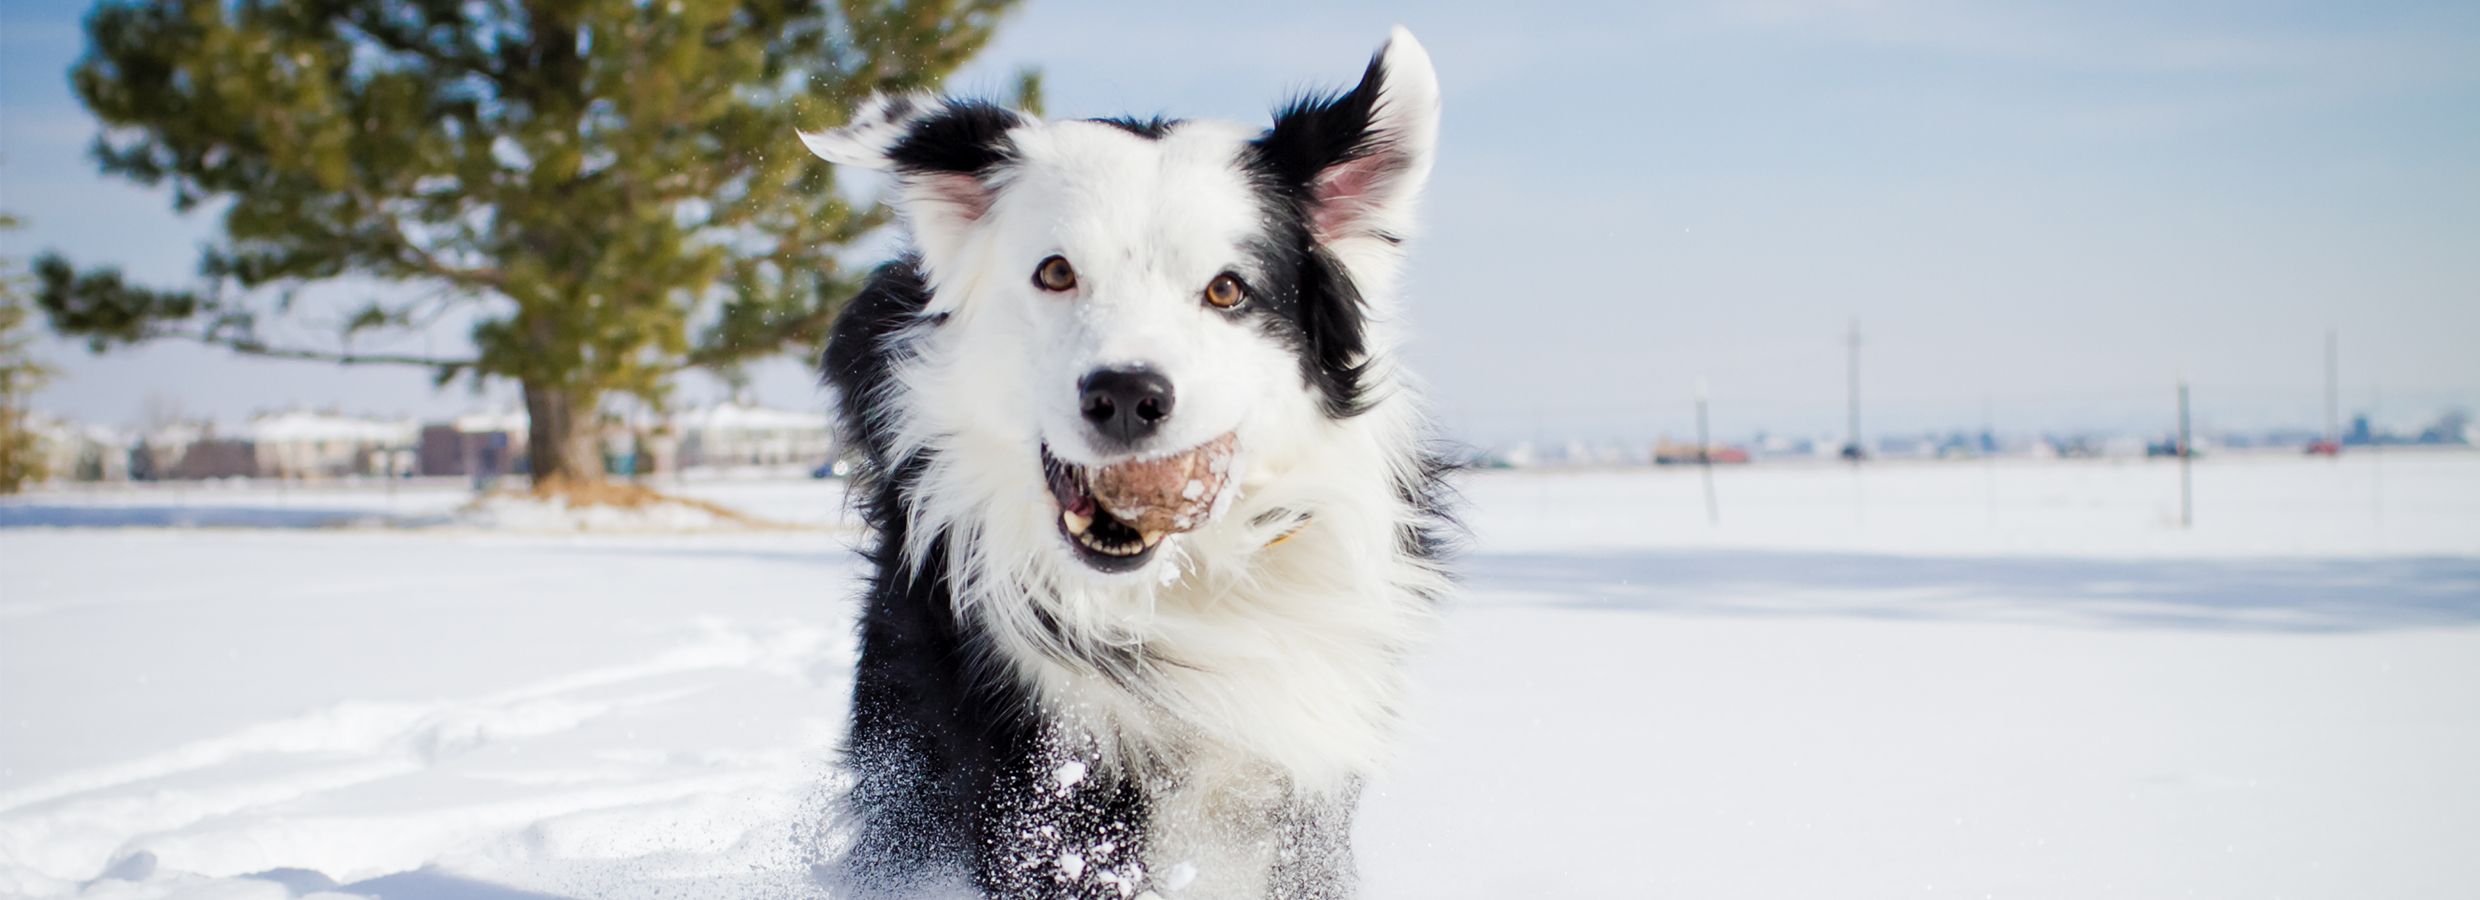 Winter Pet Safety: Outdoor Dog & Winter Shelter Tips